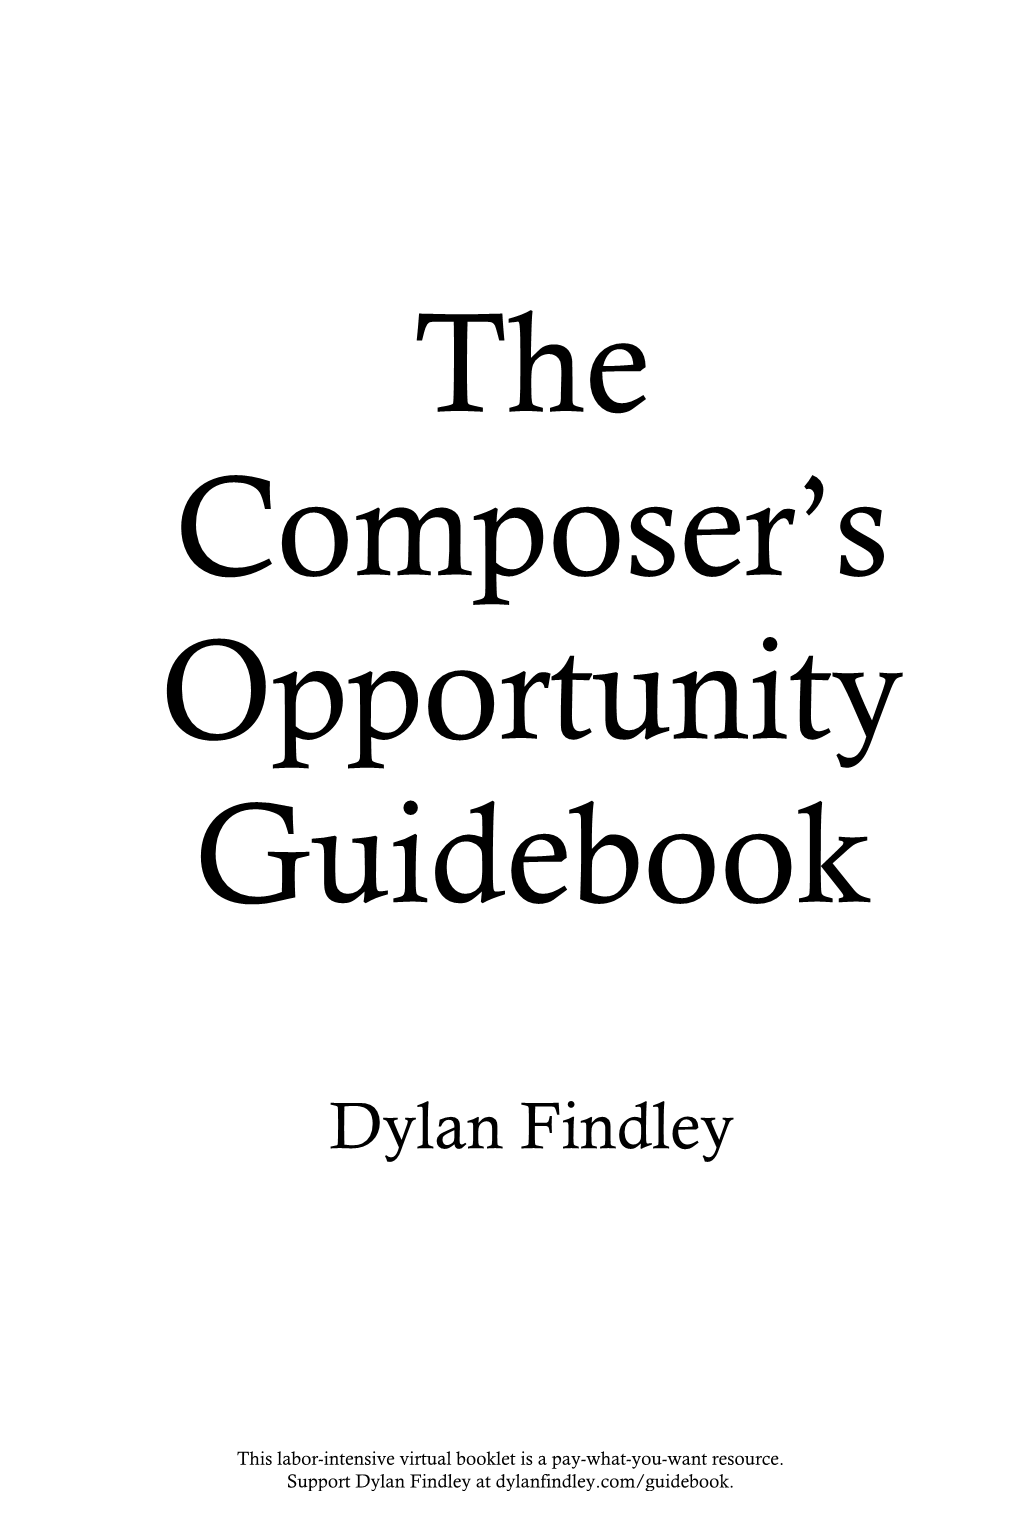 The Composer's Opportunity Guidebook